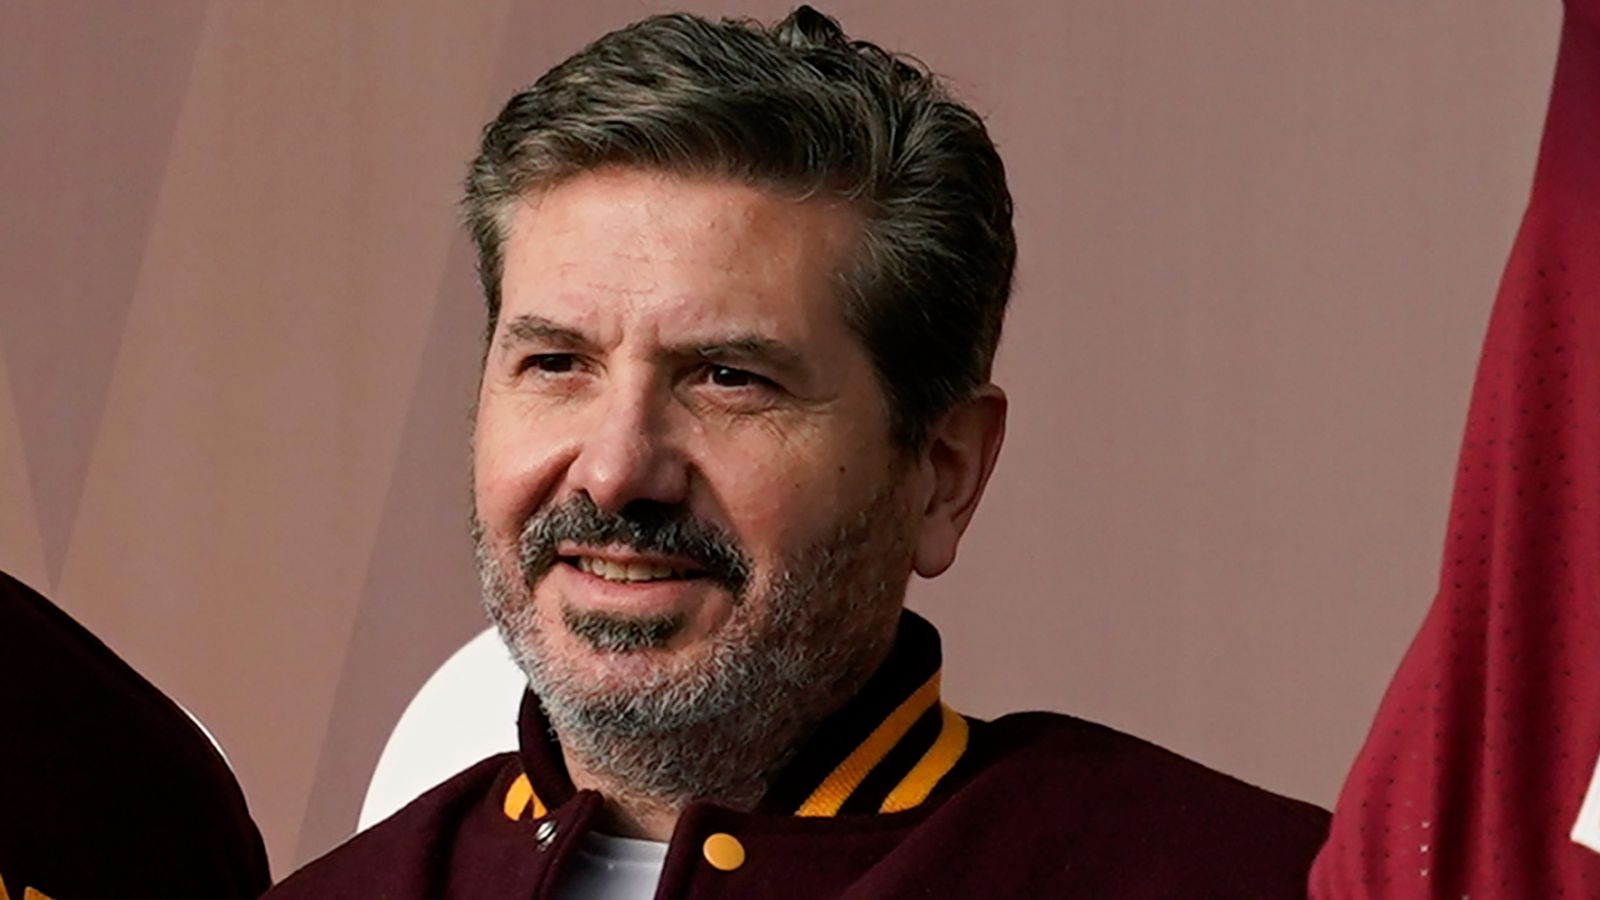 Washington Commanders owner Dan Snyder ‘exploring options’ to sell the team |  NFL News